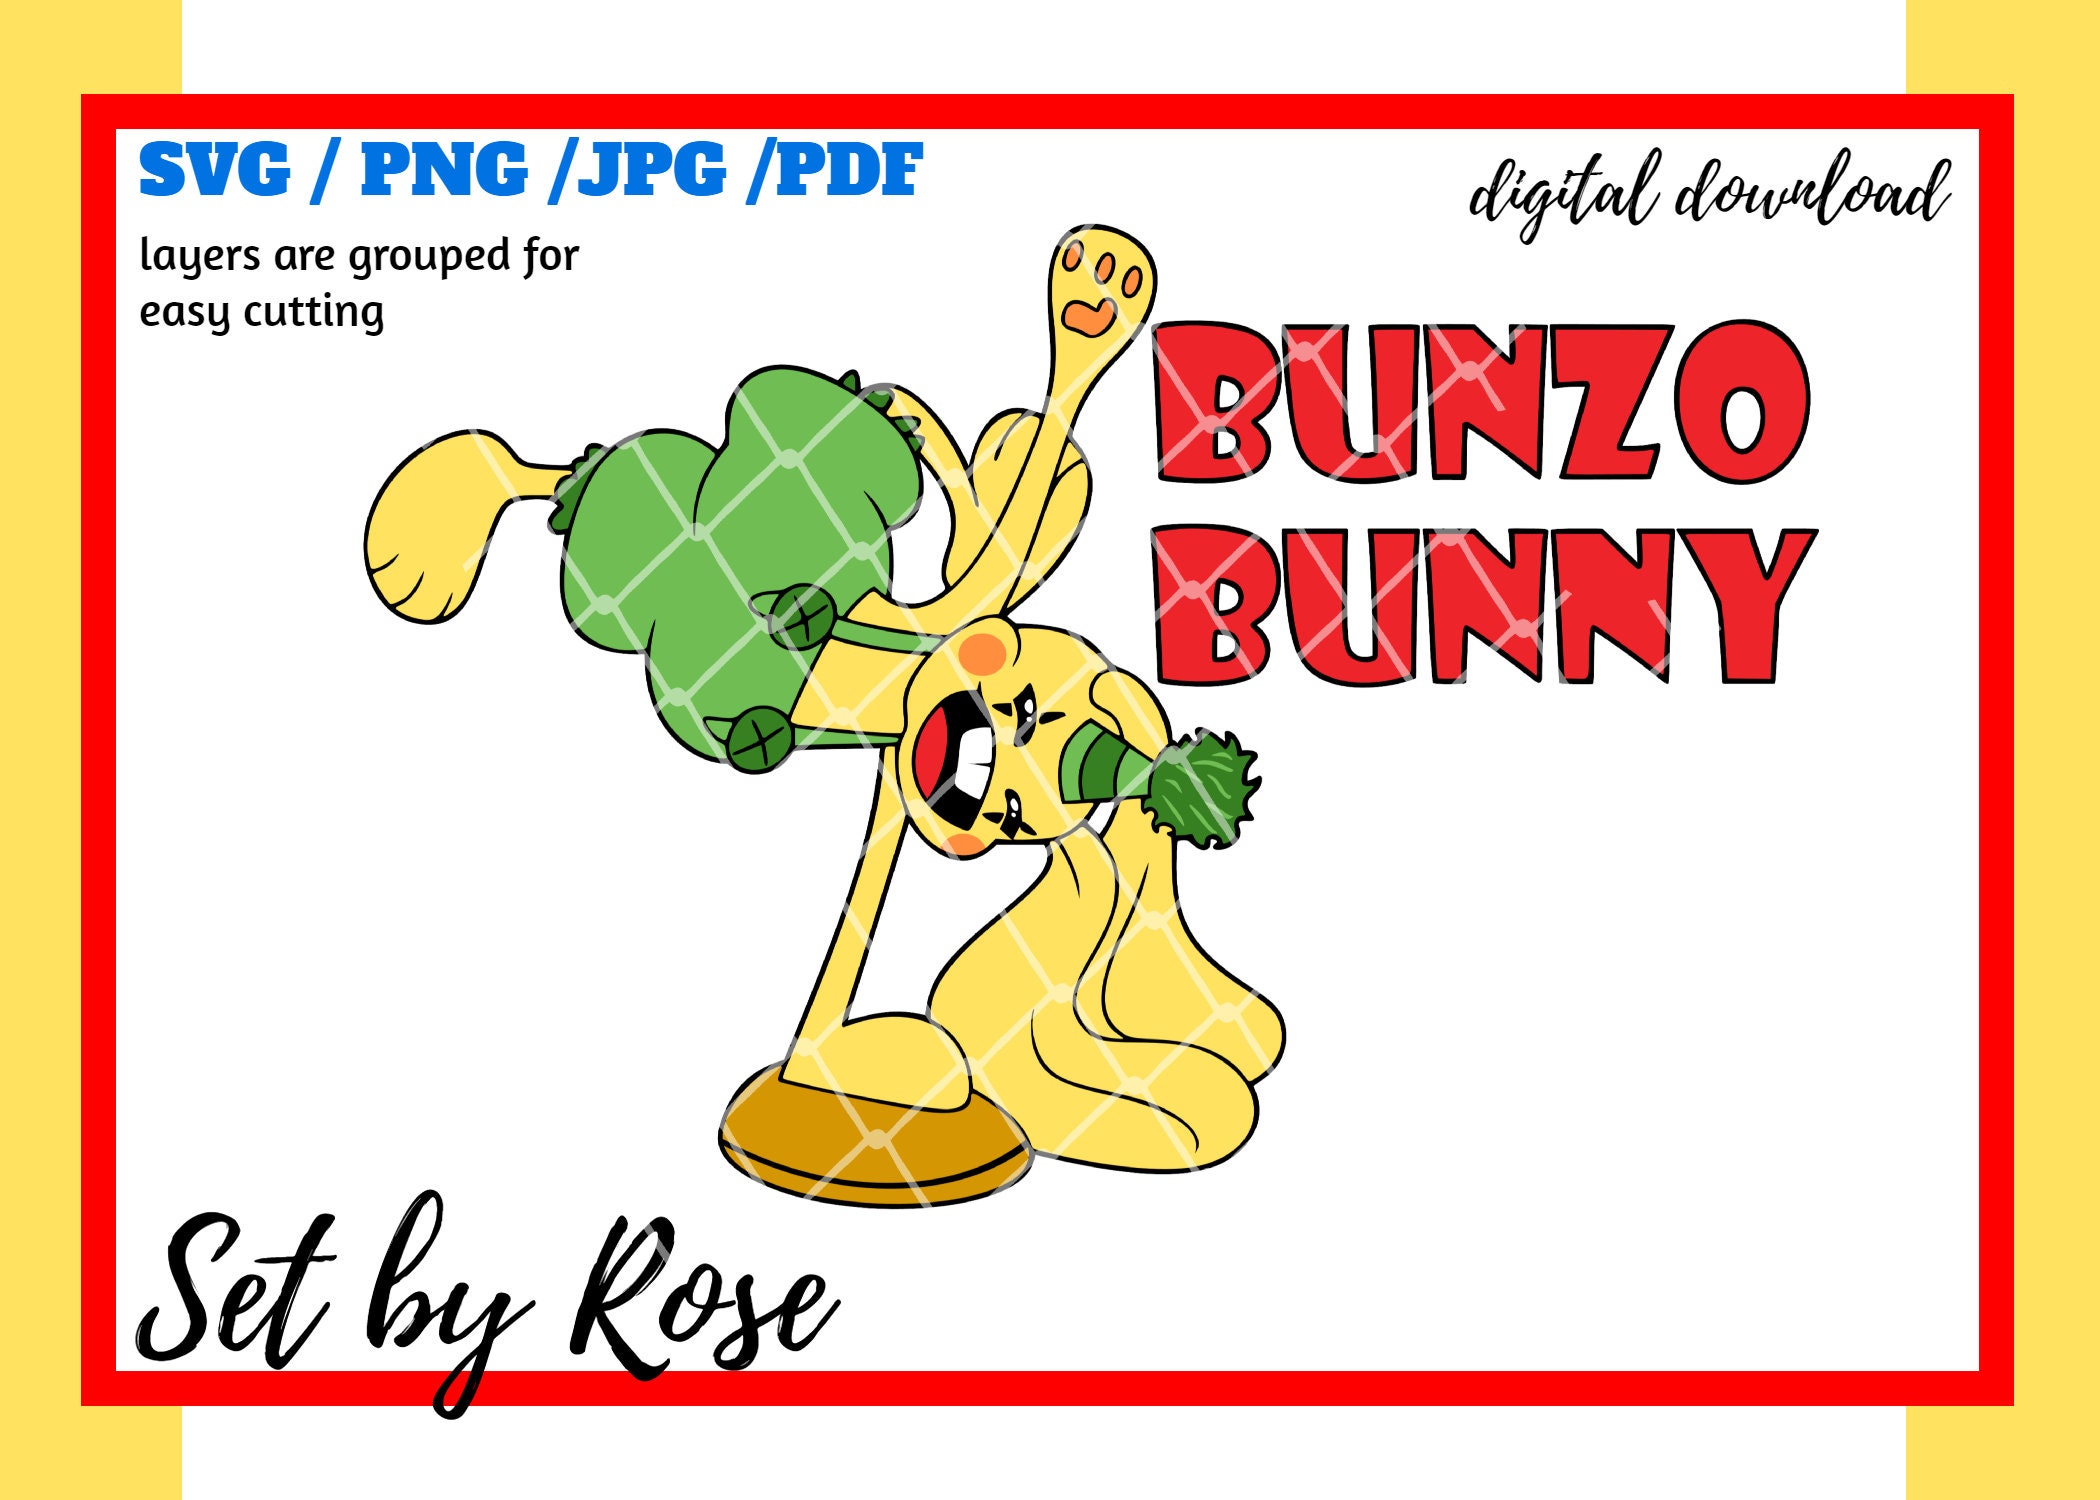 Bunzo Bunny Huggy Wuggy Game Charector Higy Quality Fabrics And Filling  Material Non-toxic (Bunzo Bunny